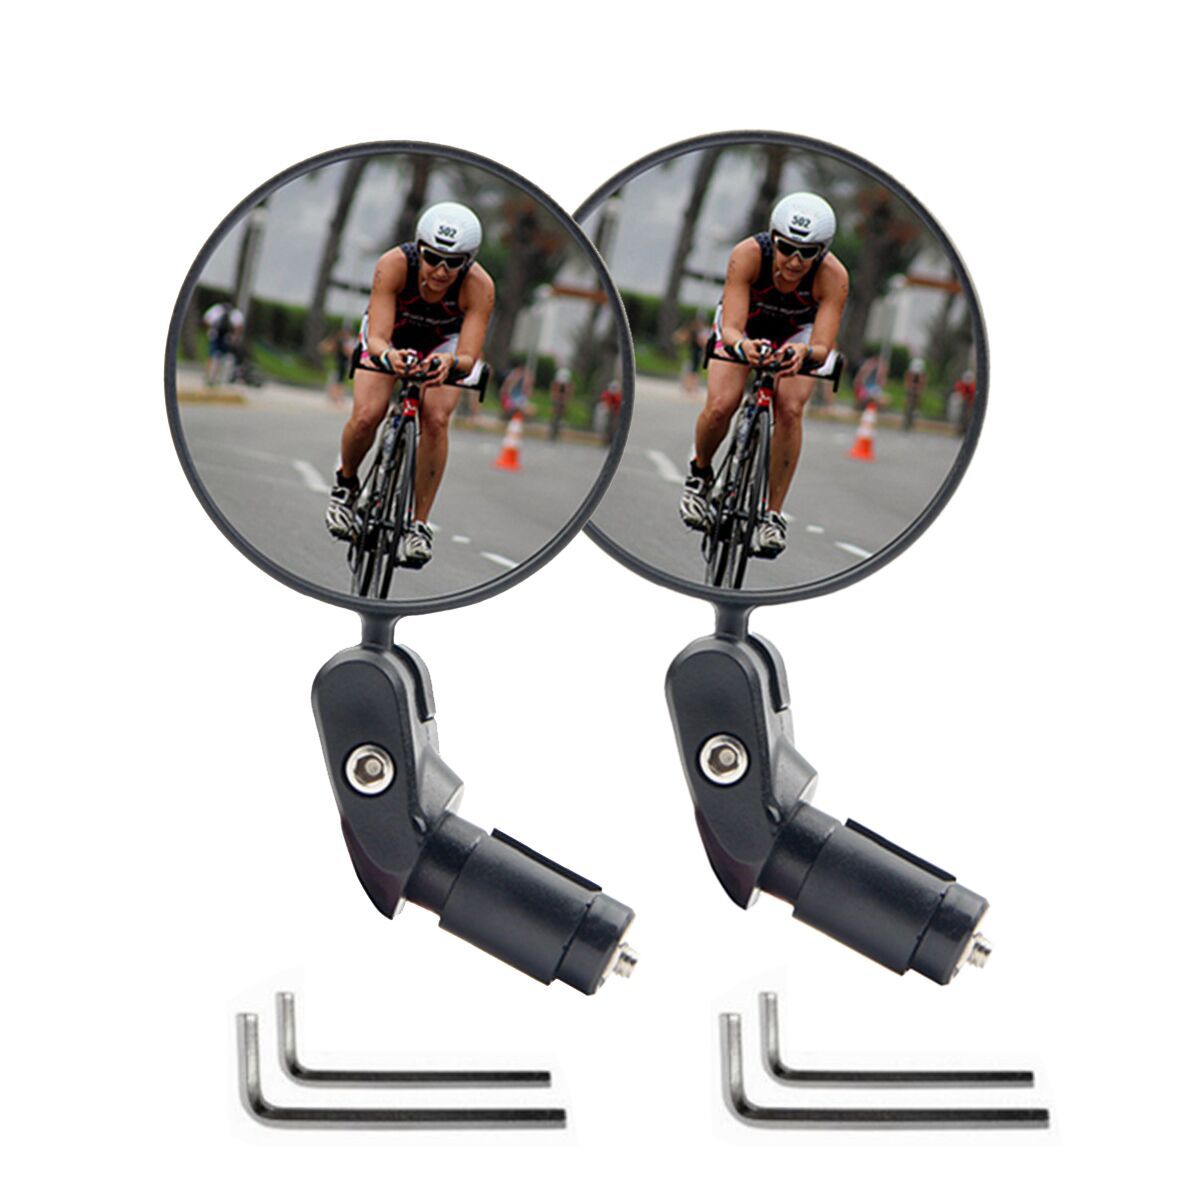 Universal Bicycle Rearview Mirror Adjustable Rotate Wide-Angle Cycling Handlebar Rear View